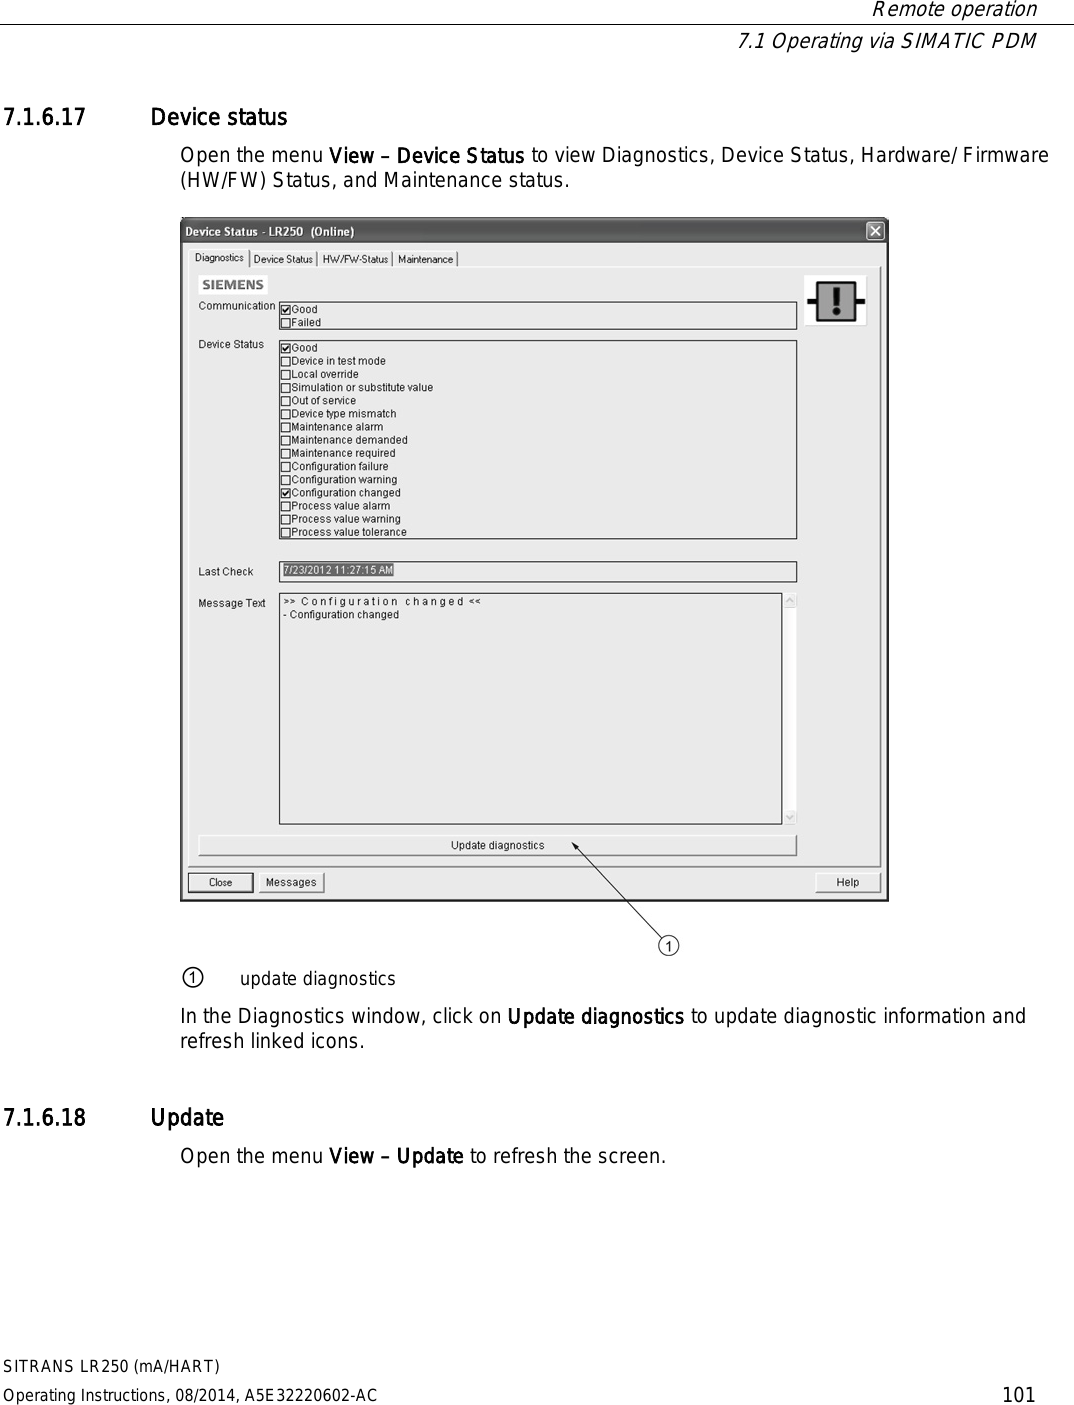  Remote operation  7.1 Operating via SIMATIC PDM SITRANS LR250 (mA/HART) Operating Instructions, 08/2014, A5E32220602-AC 101 7.1.6.17 Device status Open the menu View – Device Status to view Diagnostics, Device Status, Hardware/ Firmware (HW/FW) Status, and Maintenance status.  ① update diagnostics In the Diagnostics window, click on Update diagnostics to update diagnostic information and refresh linked icons. 7.1.6.18 Update Open the menu View – Update to refresh the screen. 